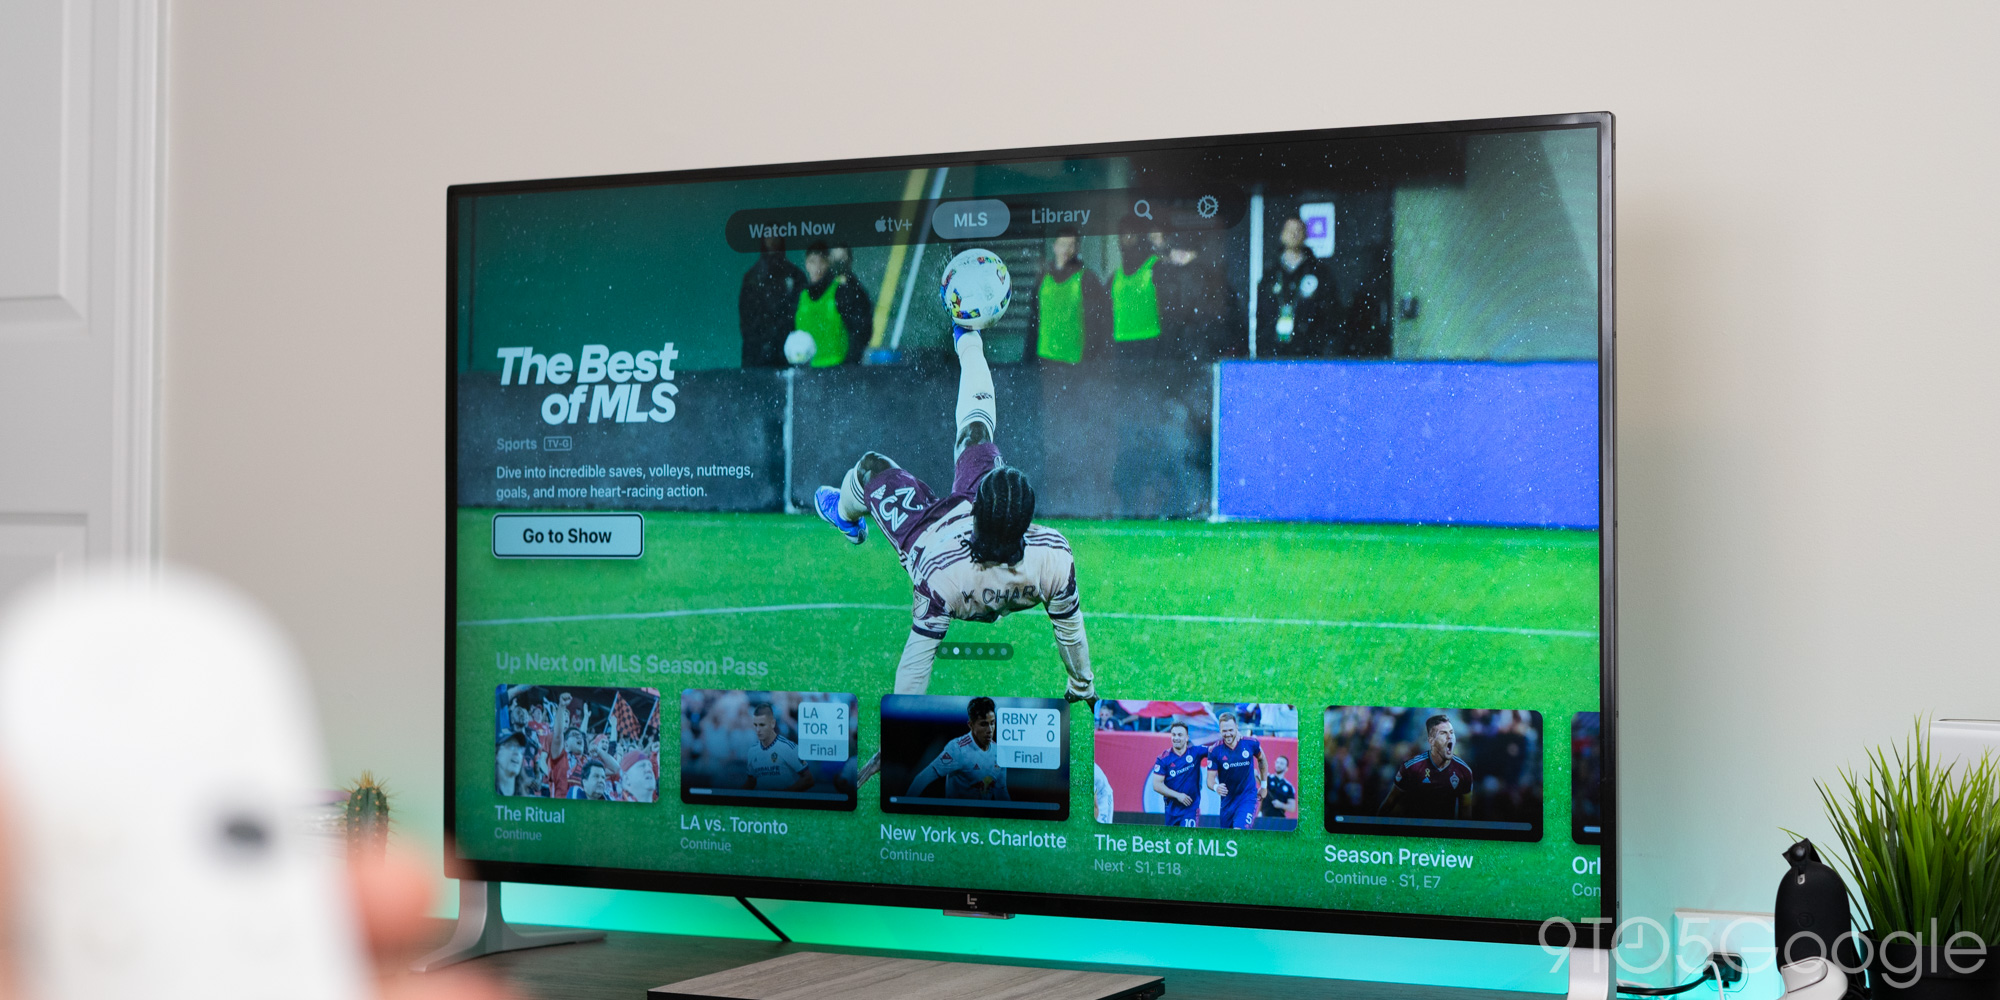 Apple's MLS Season Pass on Android TV: What you need to know